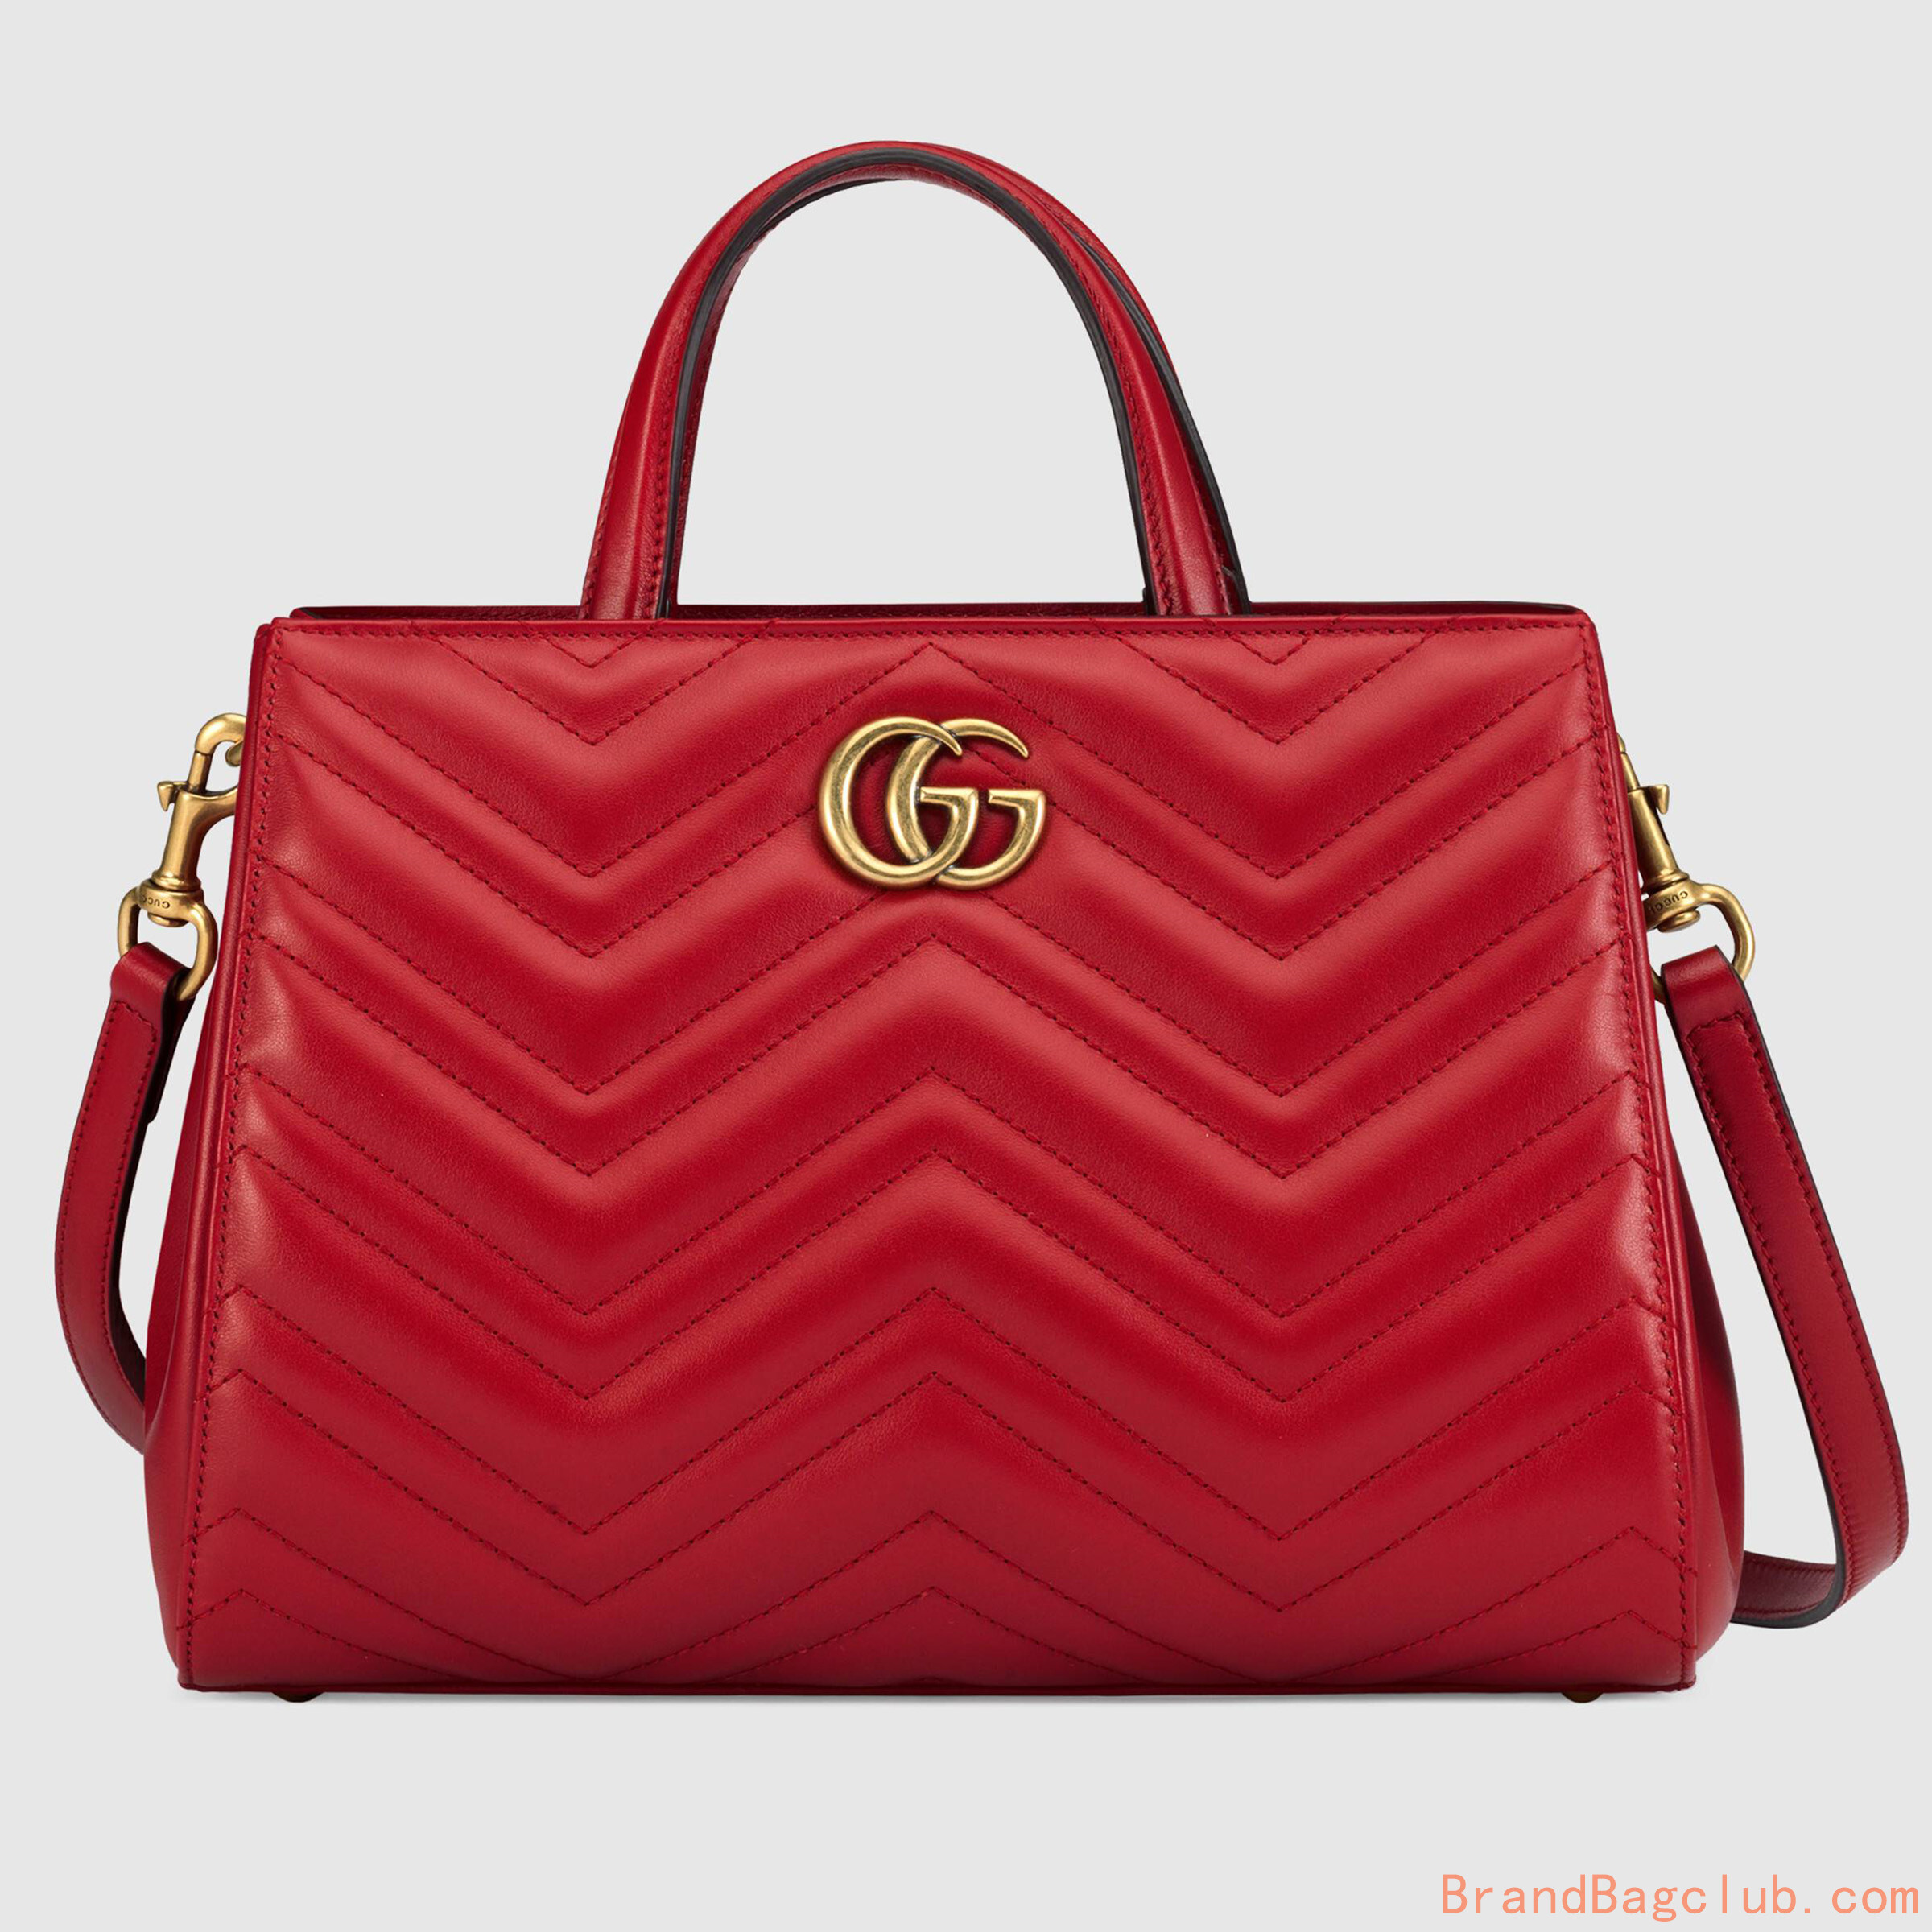 Gucci bags for women GG Marmont small top handle bag hibiscus leather red 448054 gucci factory ...